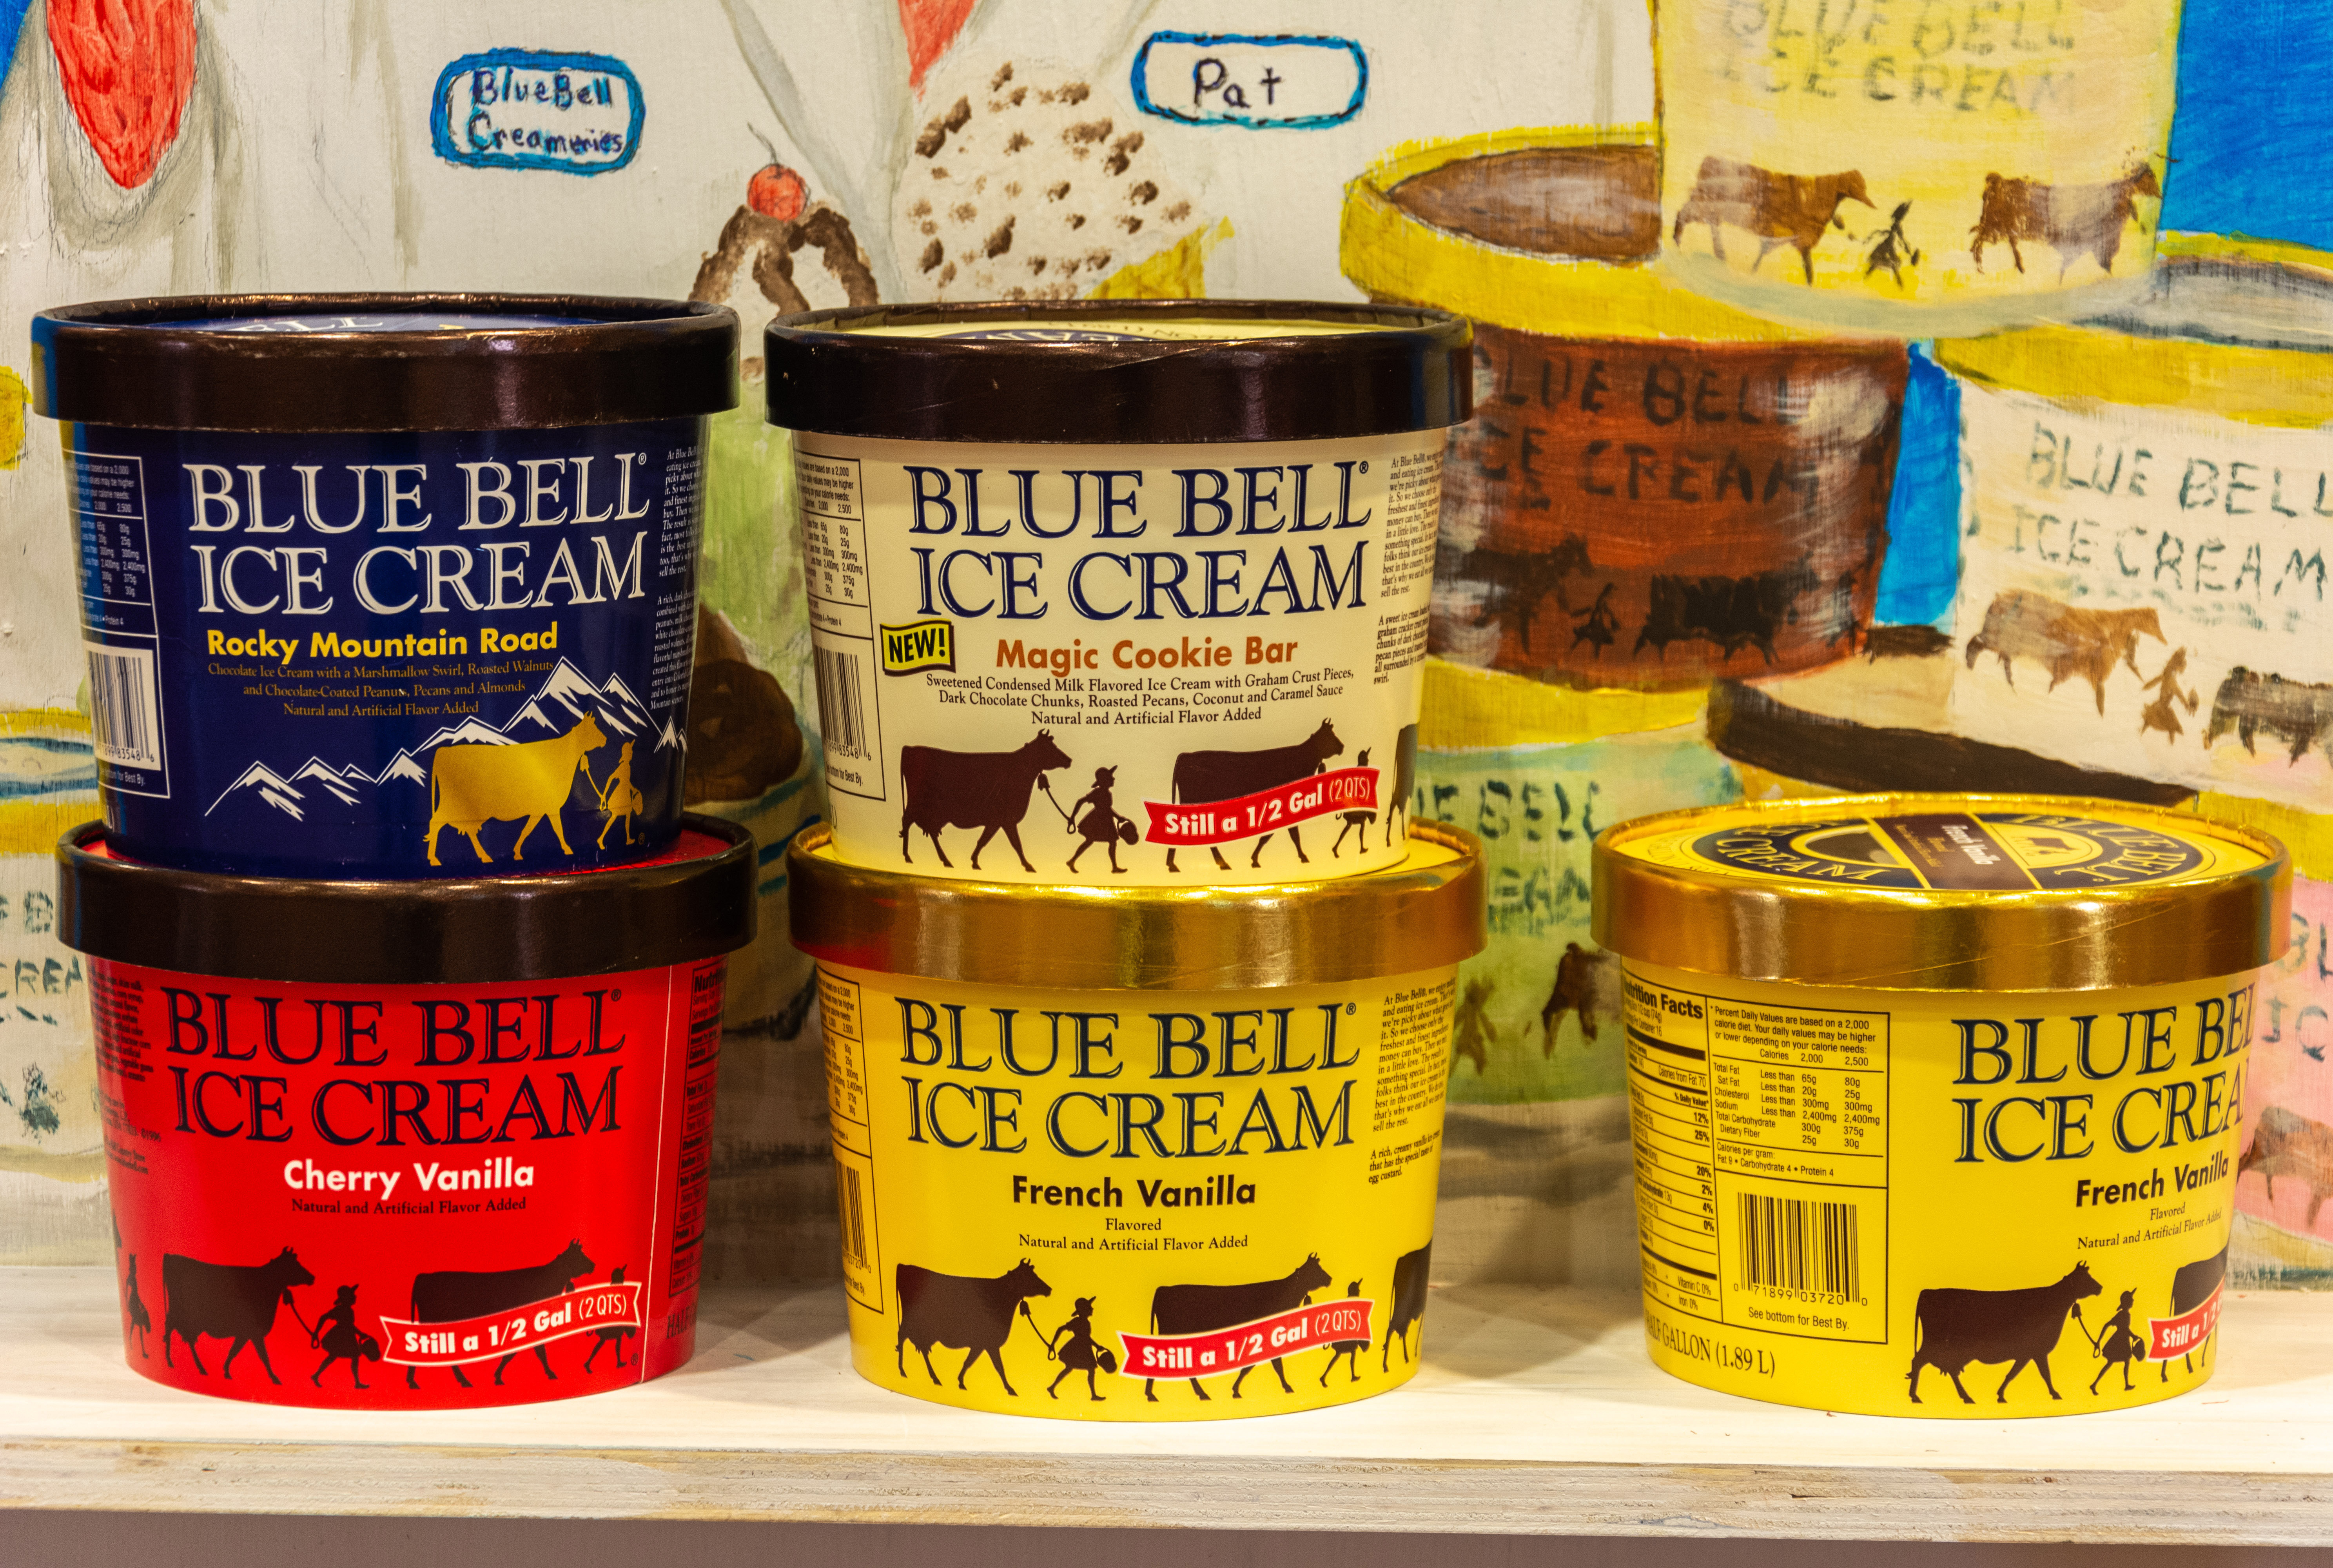 Blue Bell ice cream cartons are stacked on top of each other. Shutterstock image via Alizada Studios